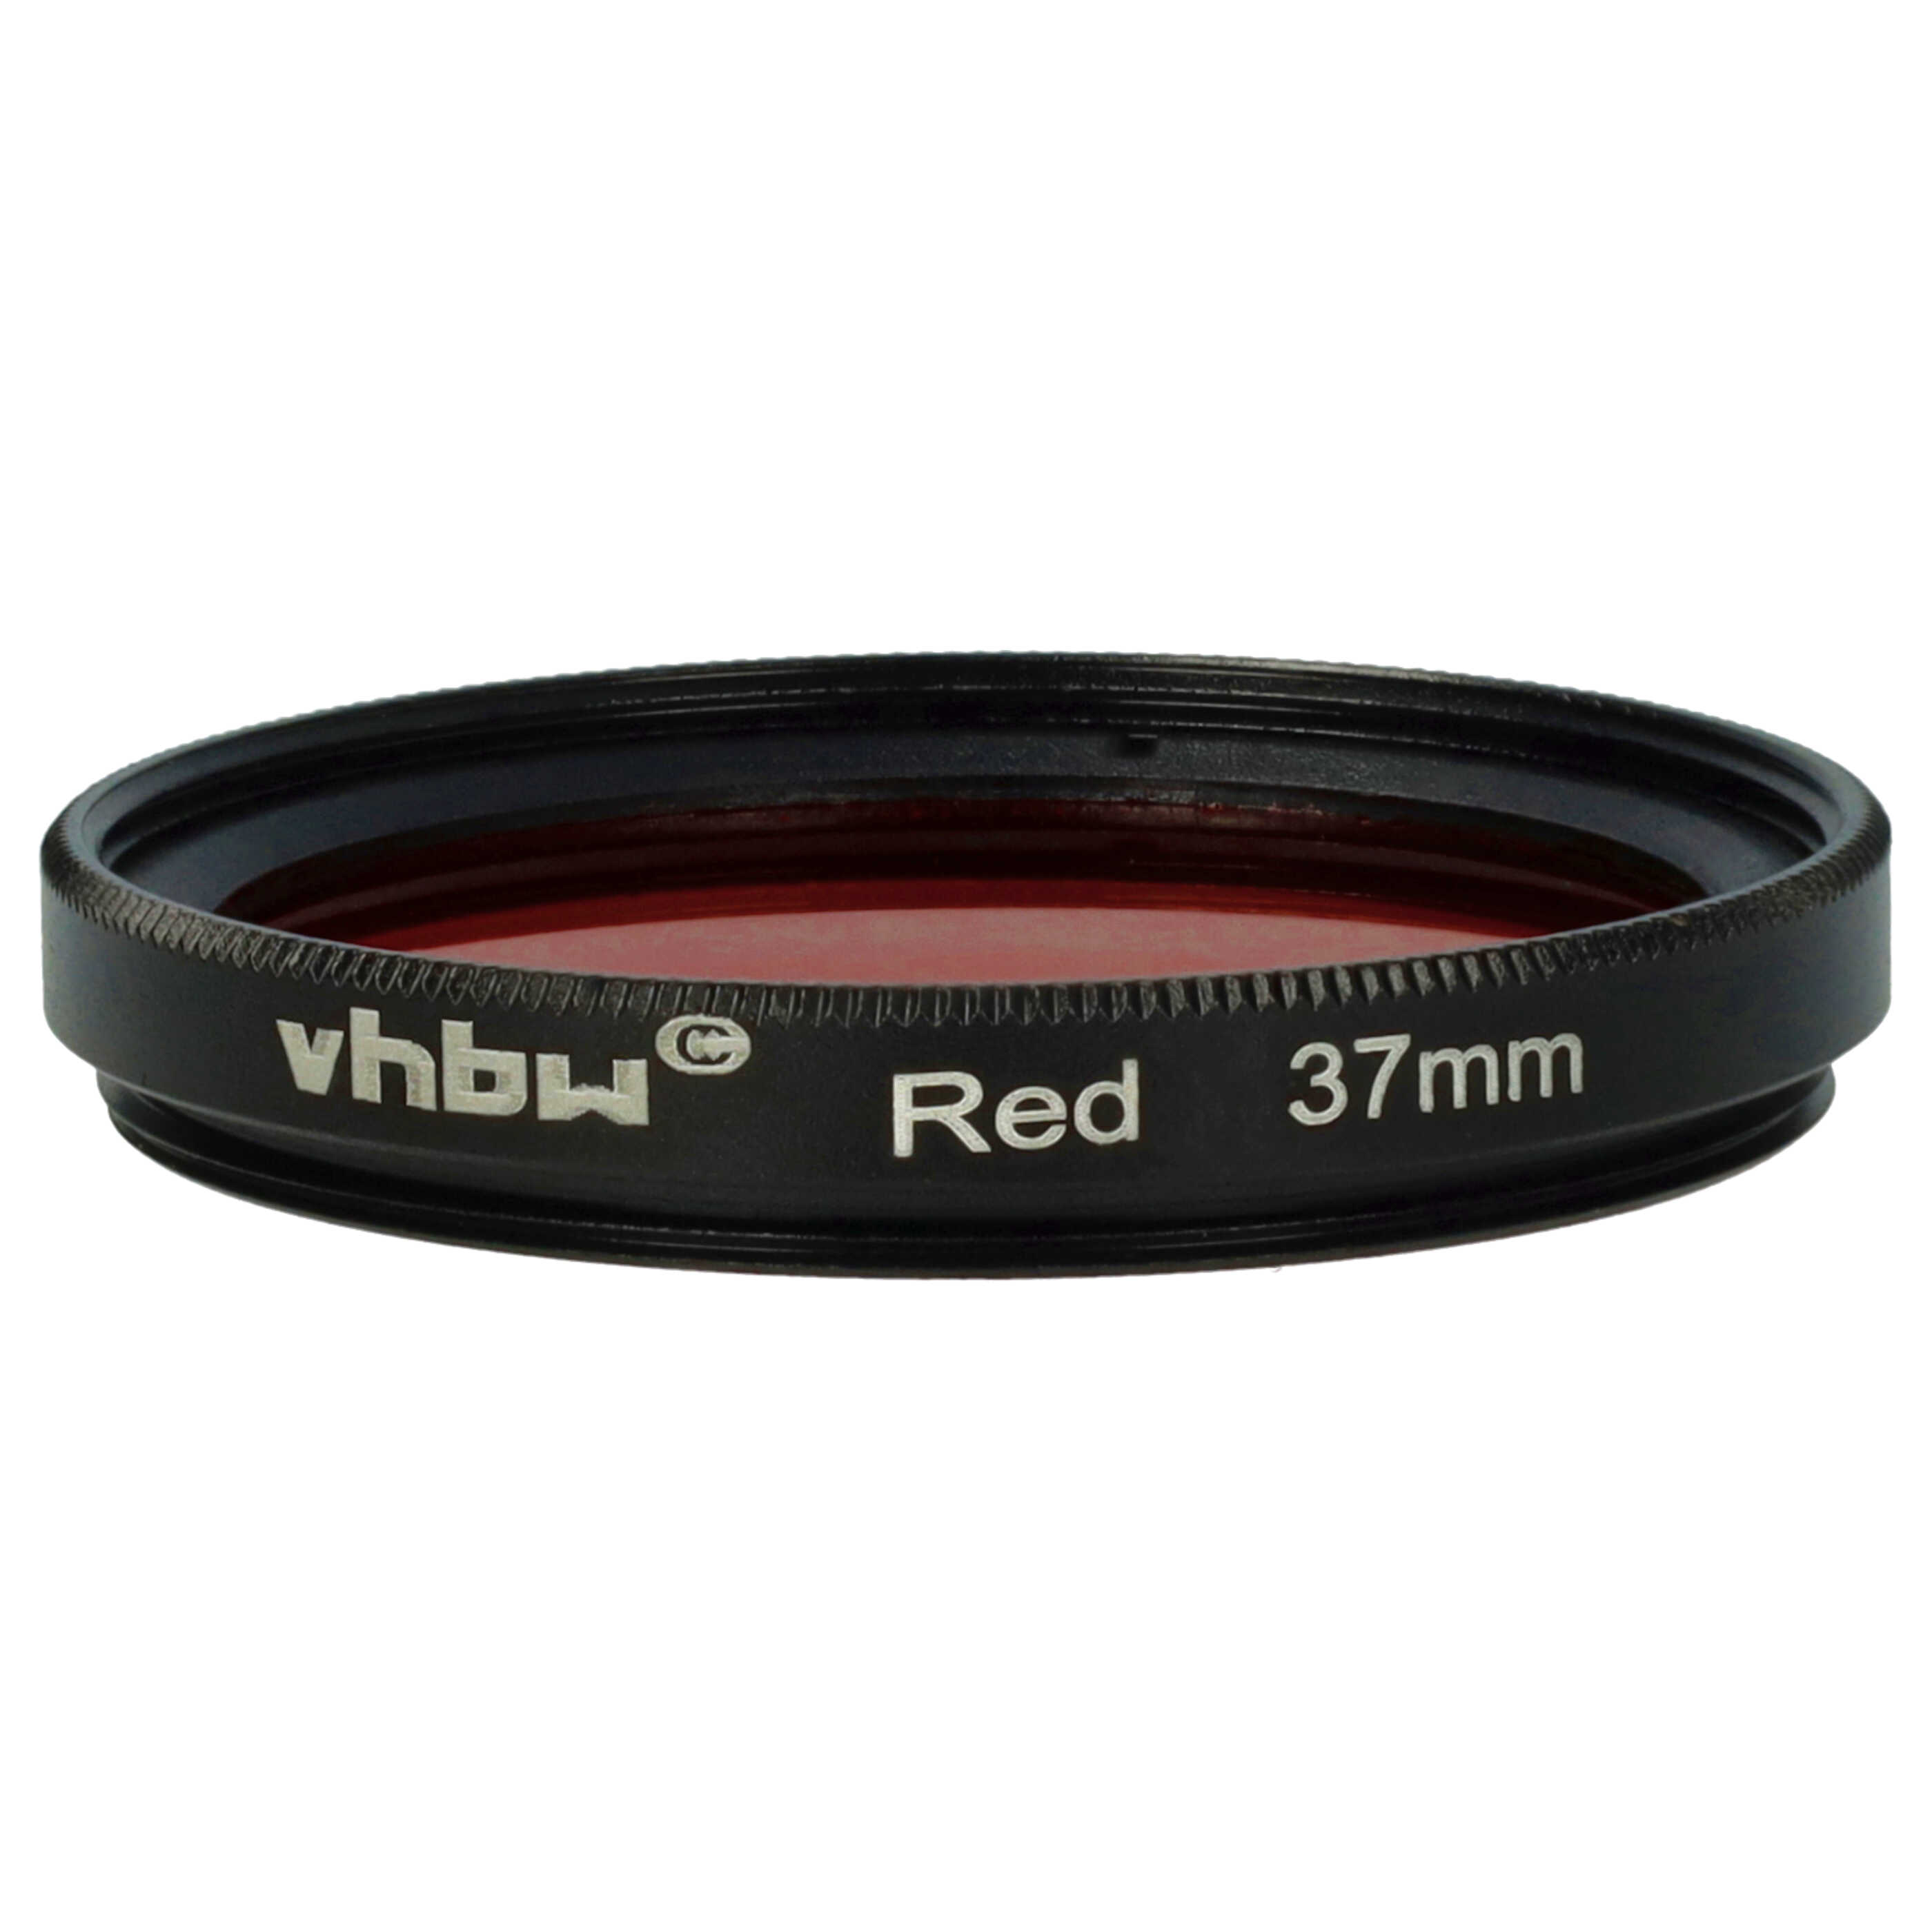 Coloured Filter, Red suitable for Camera Lenses with 37 mm Filter Thread - Red Filter